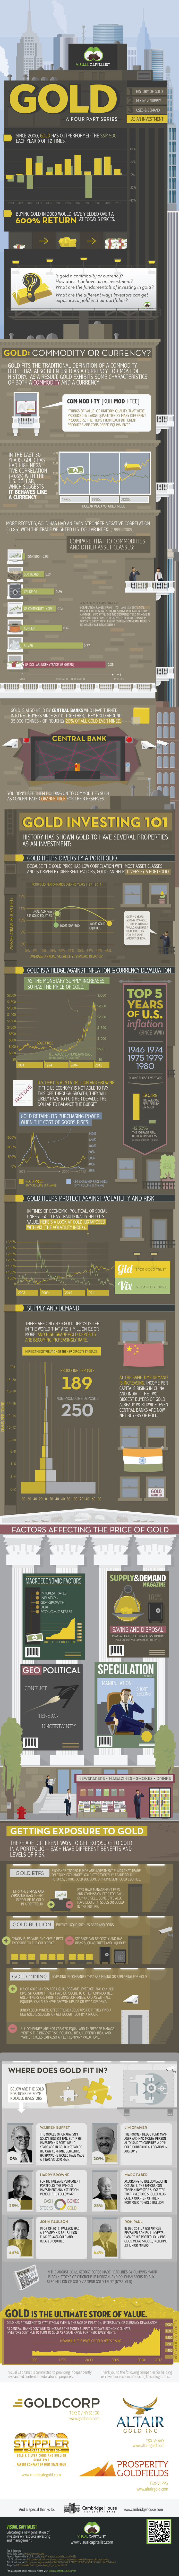 Gold Infographic:  Gold as an Investment